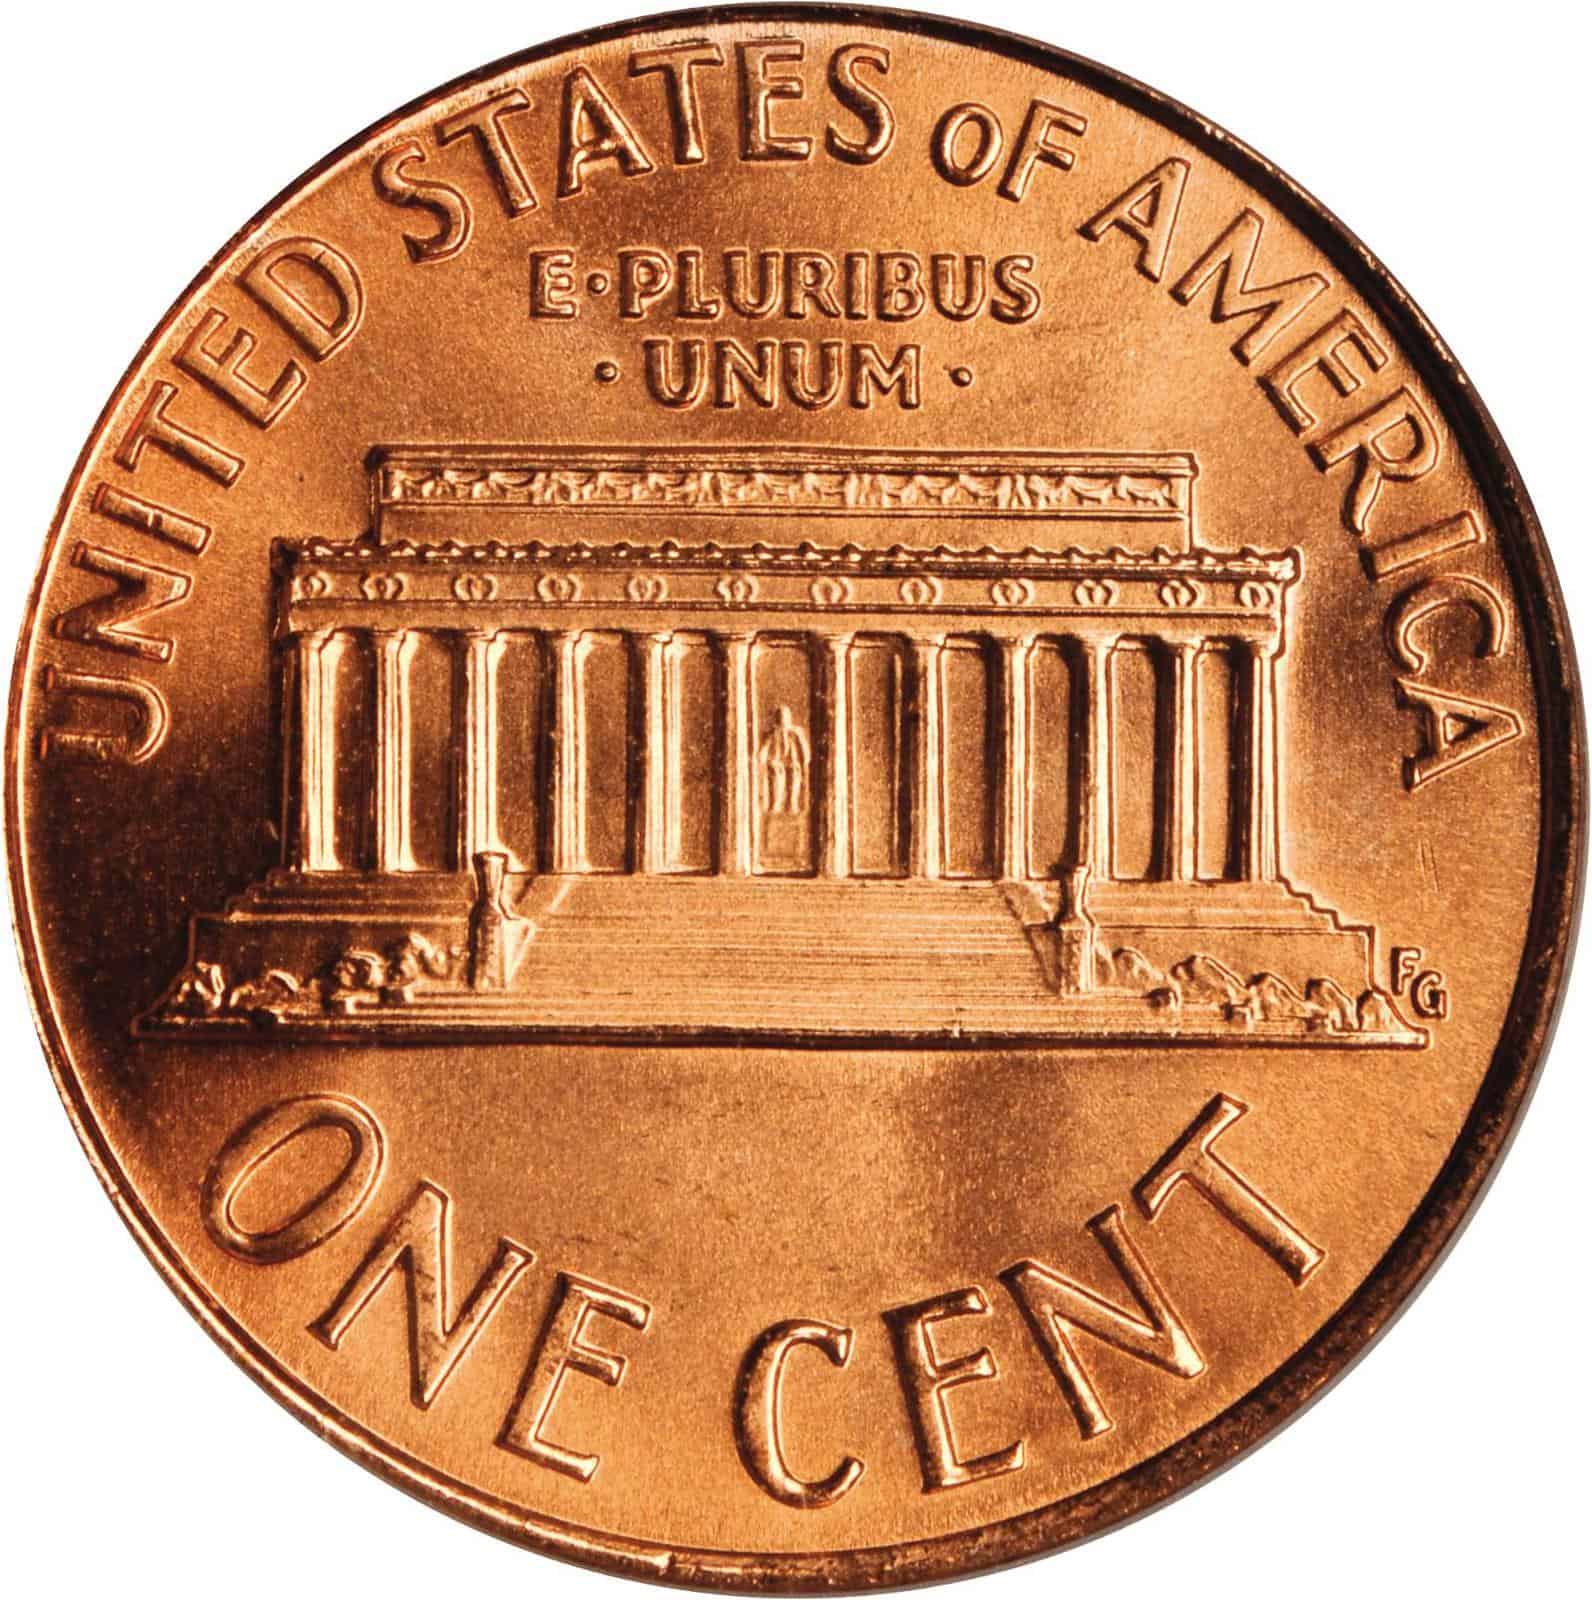 The reverse of the 1992 Memorial penny